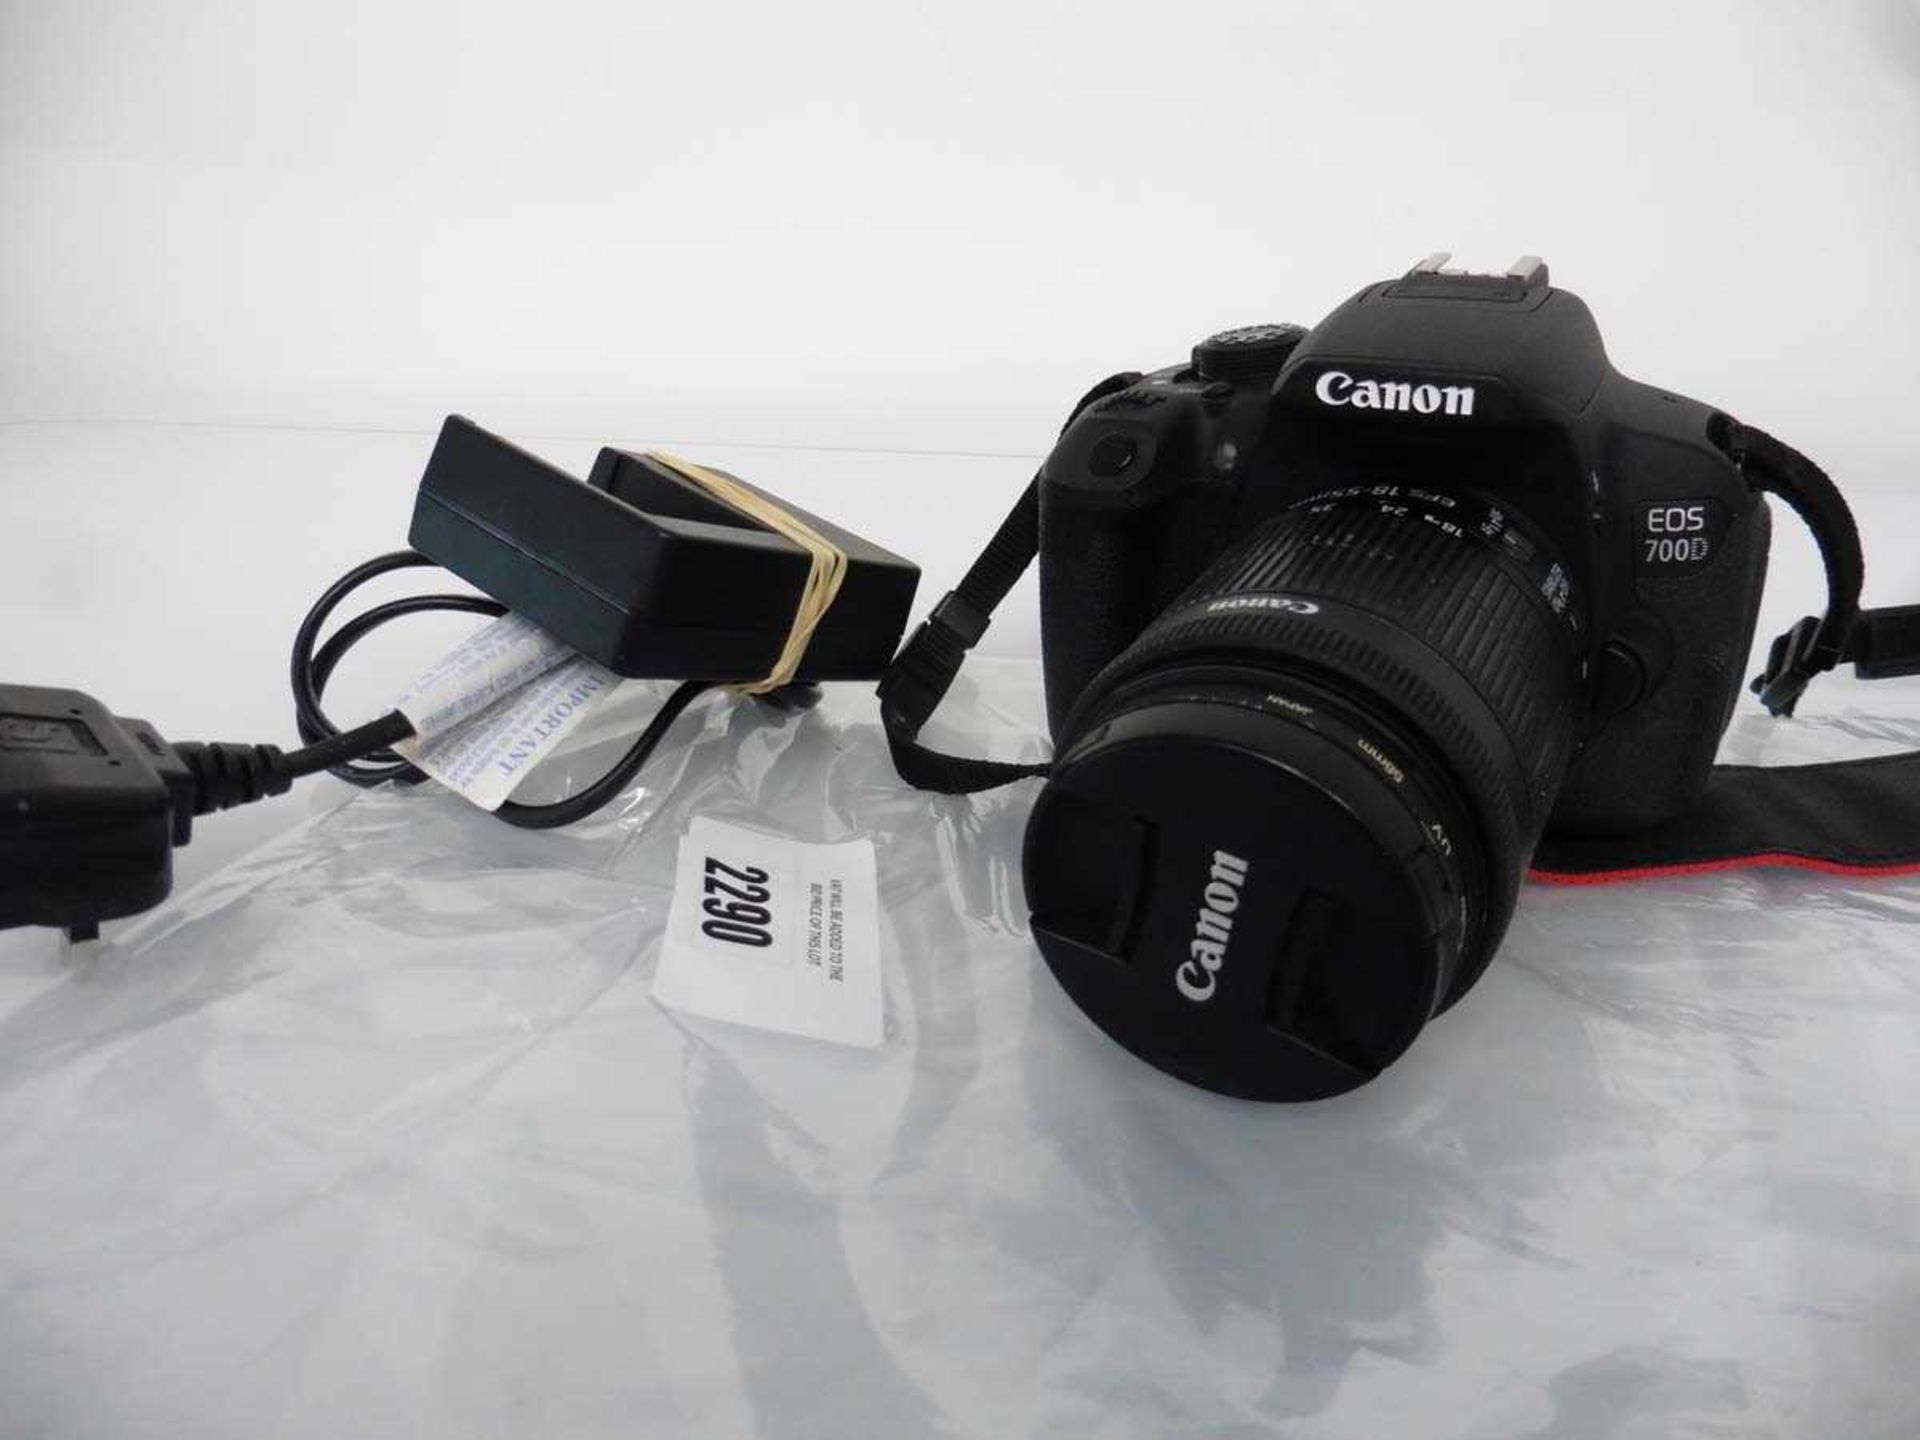 +VAT Canon EOS 700D Digital SLR camera with EFS18-55mm lens & battery charger